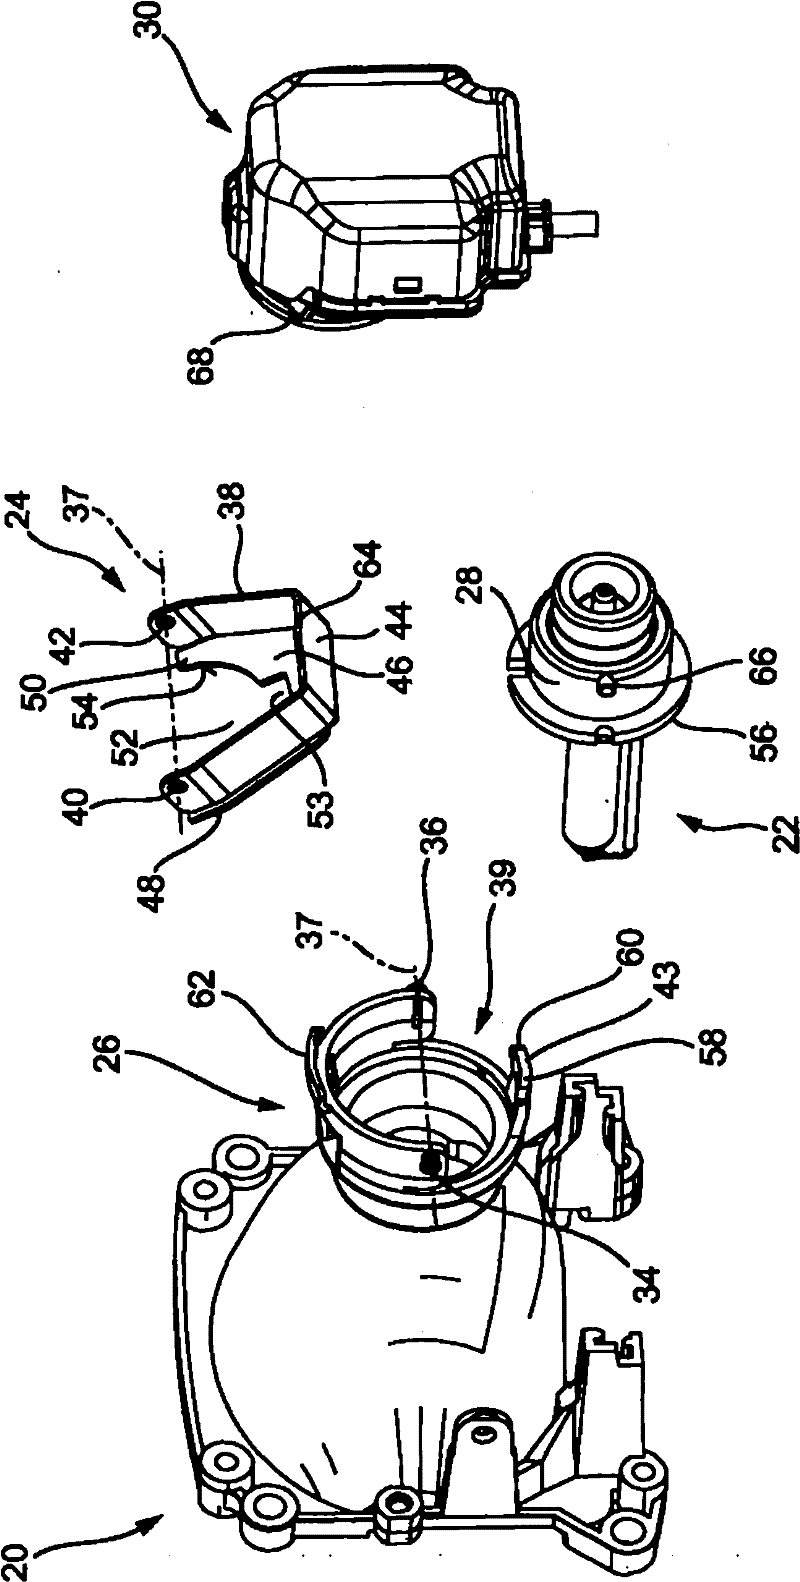 Motor vehicle headlight designed for fixing gas discharge lamp provided with separate ignition device